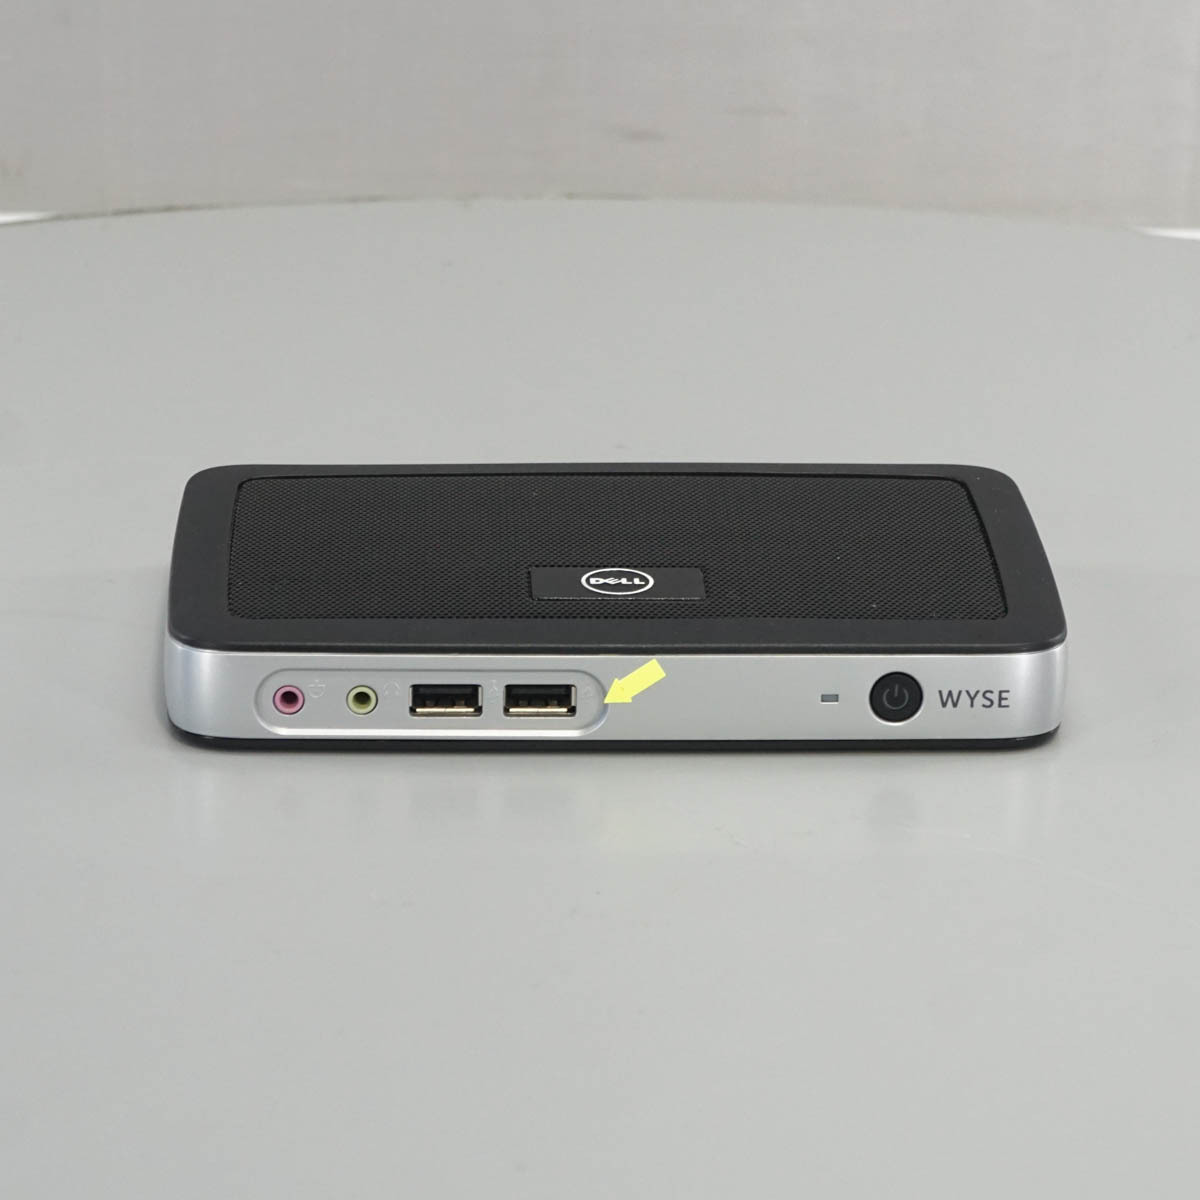 [PG]USED 8 day guarantee DELL Tx0 WYSE Thin Client thin client [ST03089-1029]